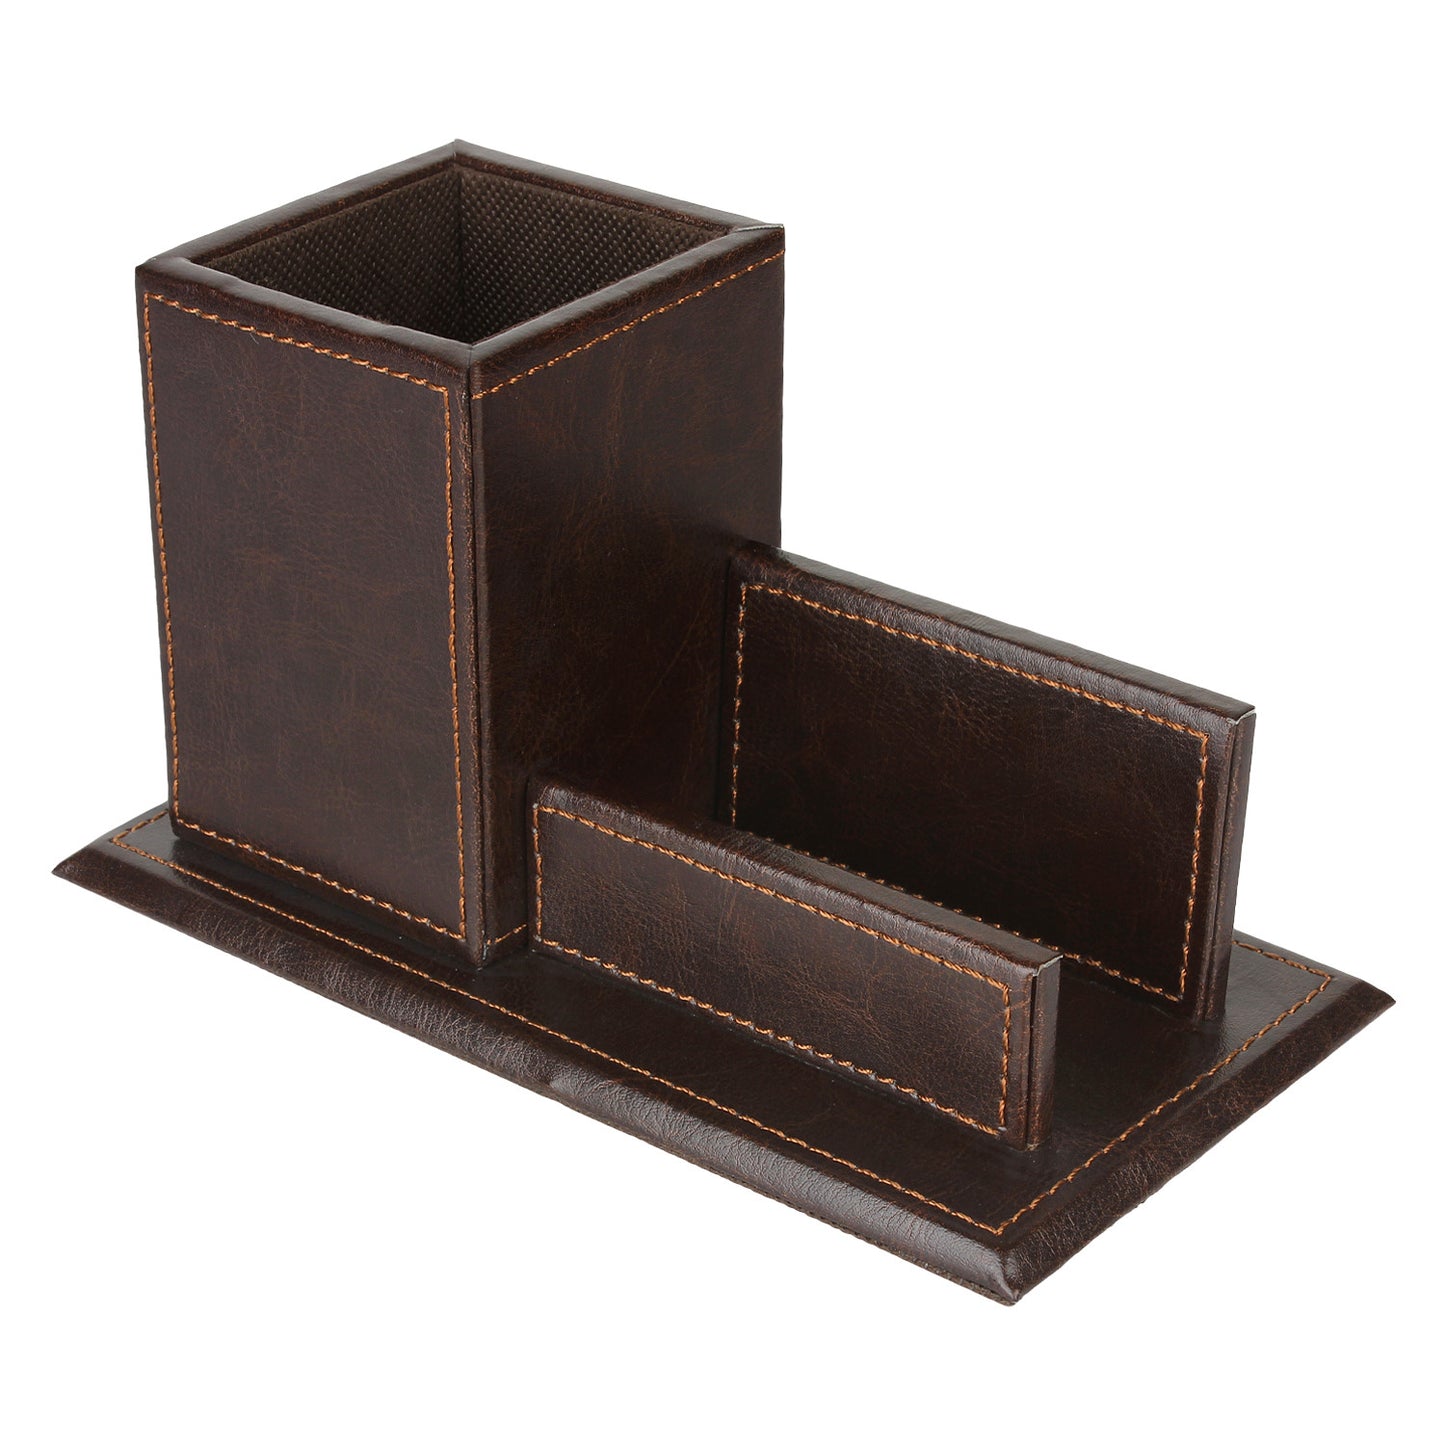 Brown Pen Holder along with a visiting card holder